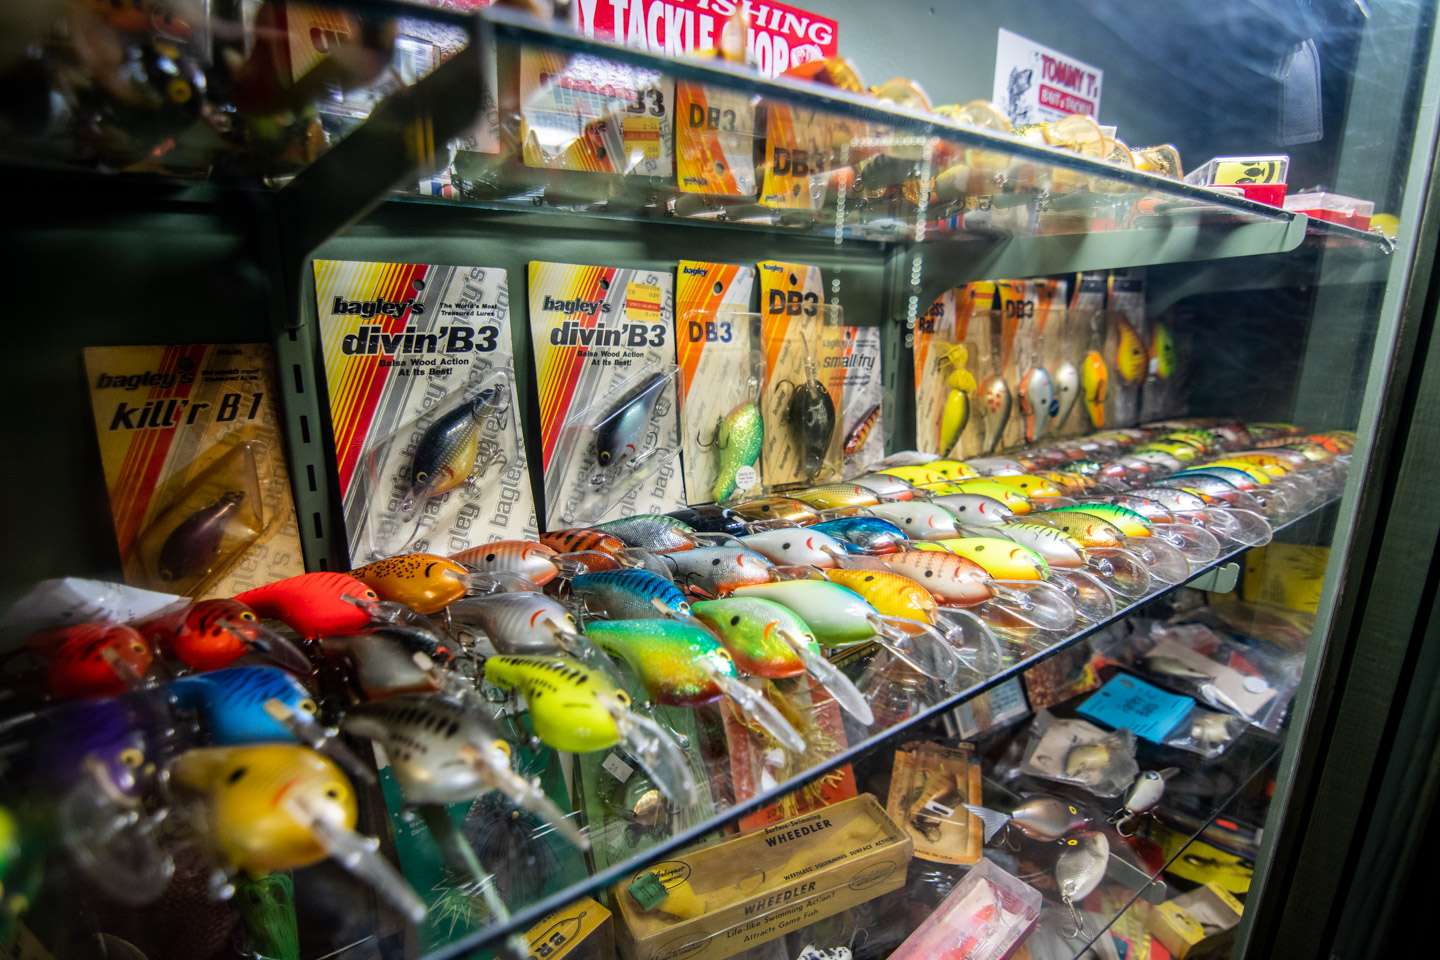 The middle shelf holds the spotlight on a variety of vintage Bagley crankbaits. 